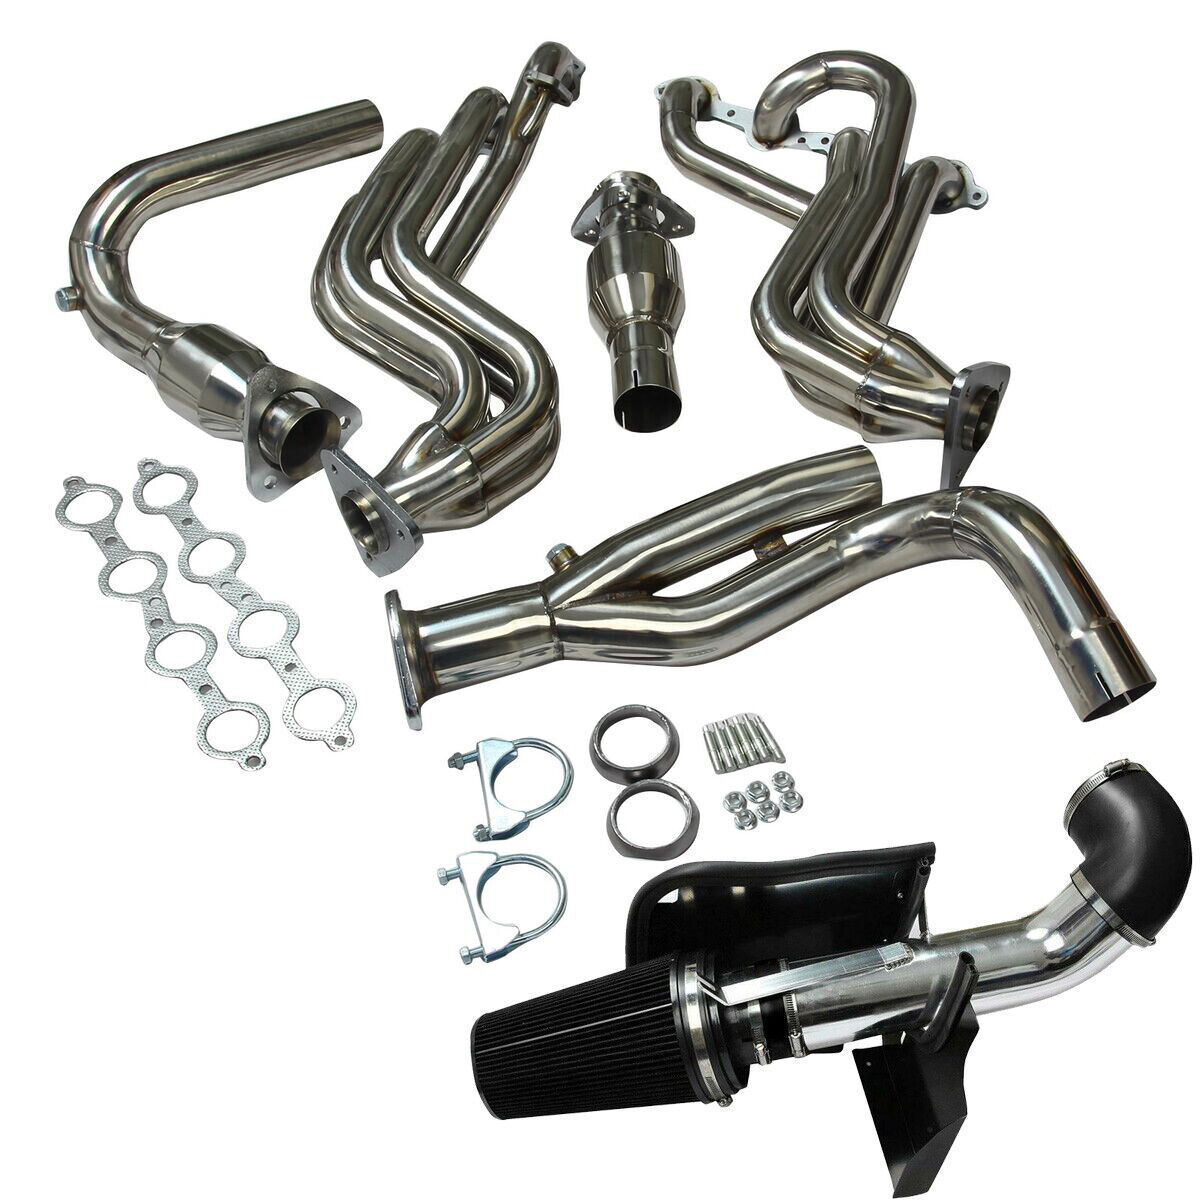 Fits GMC/Chevy 4.8/5.3 V8 Stainless Steel Exhaust Header+Y Pipe+COLD AIR INTAKE